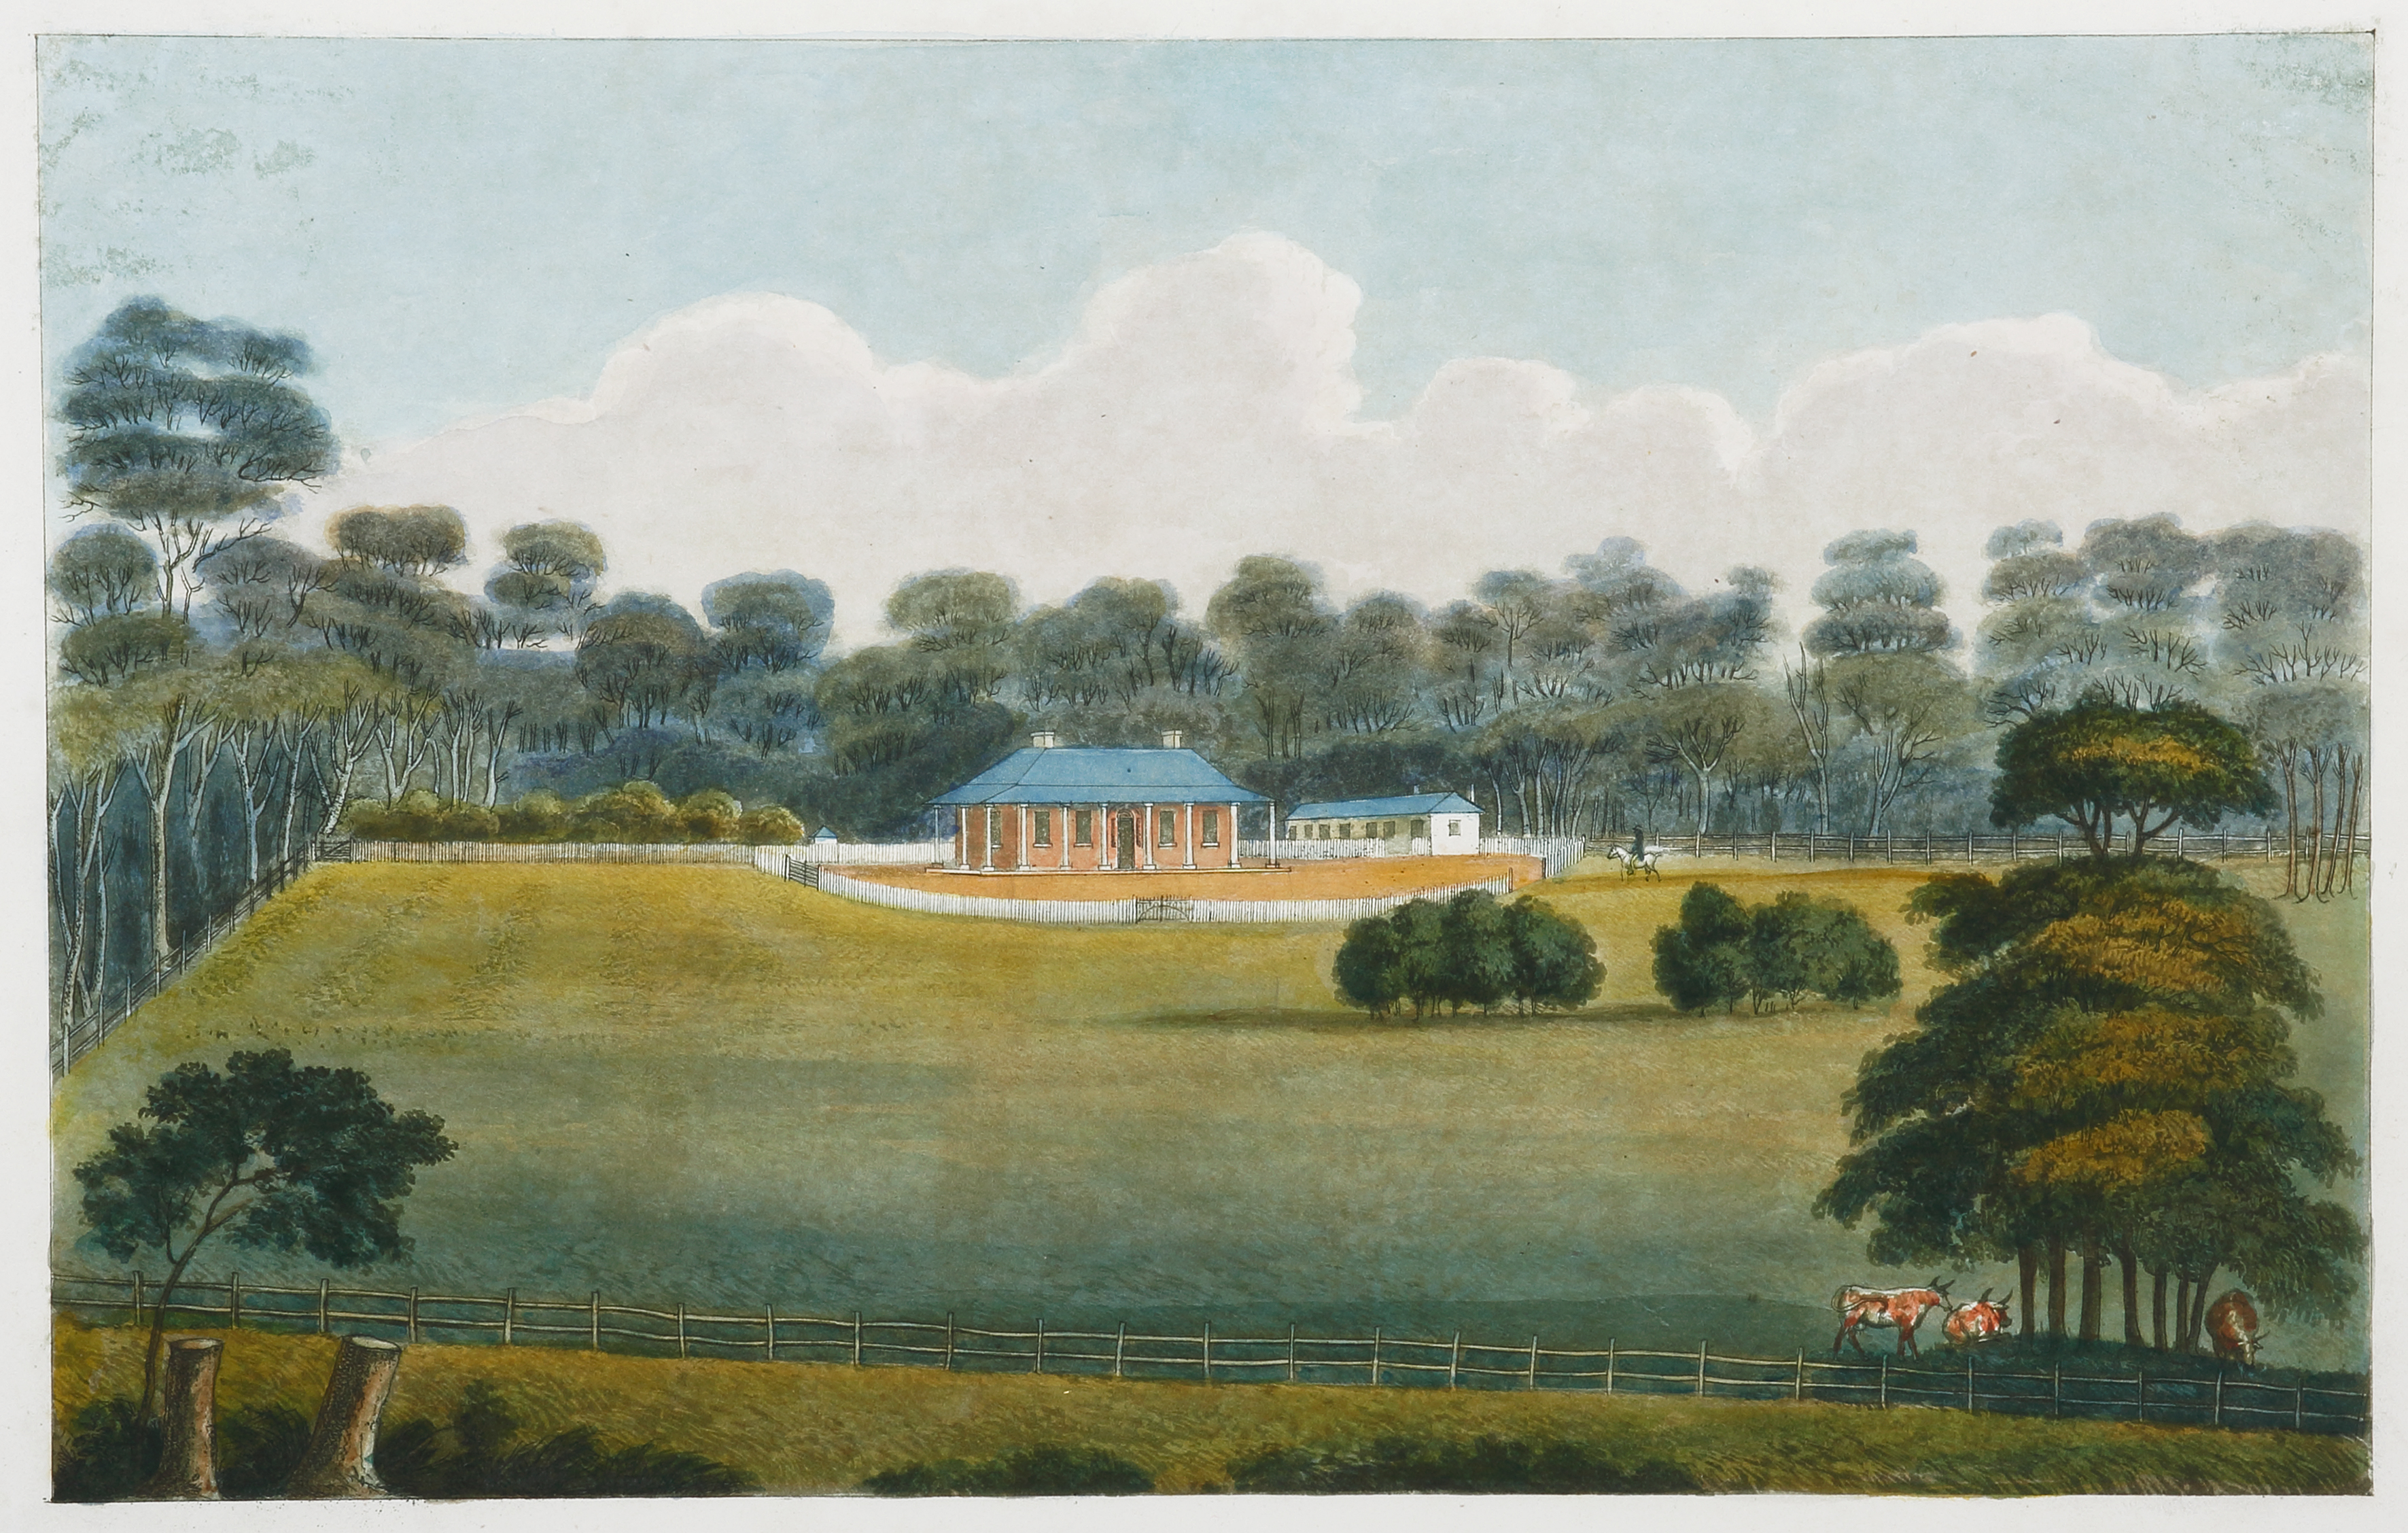 Burwood Villa, New South Wales, The Property of Alexander Riley Esq. - Antique View from 1824